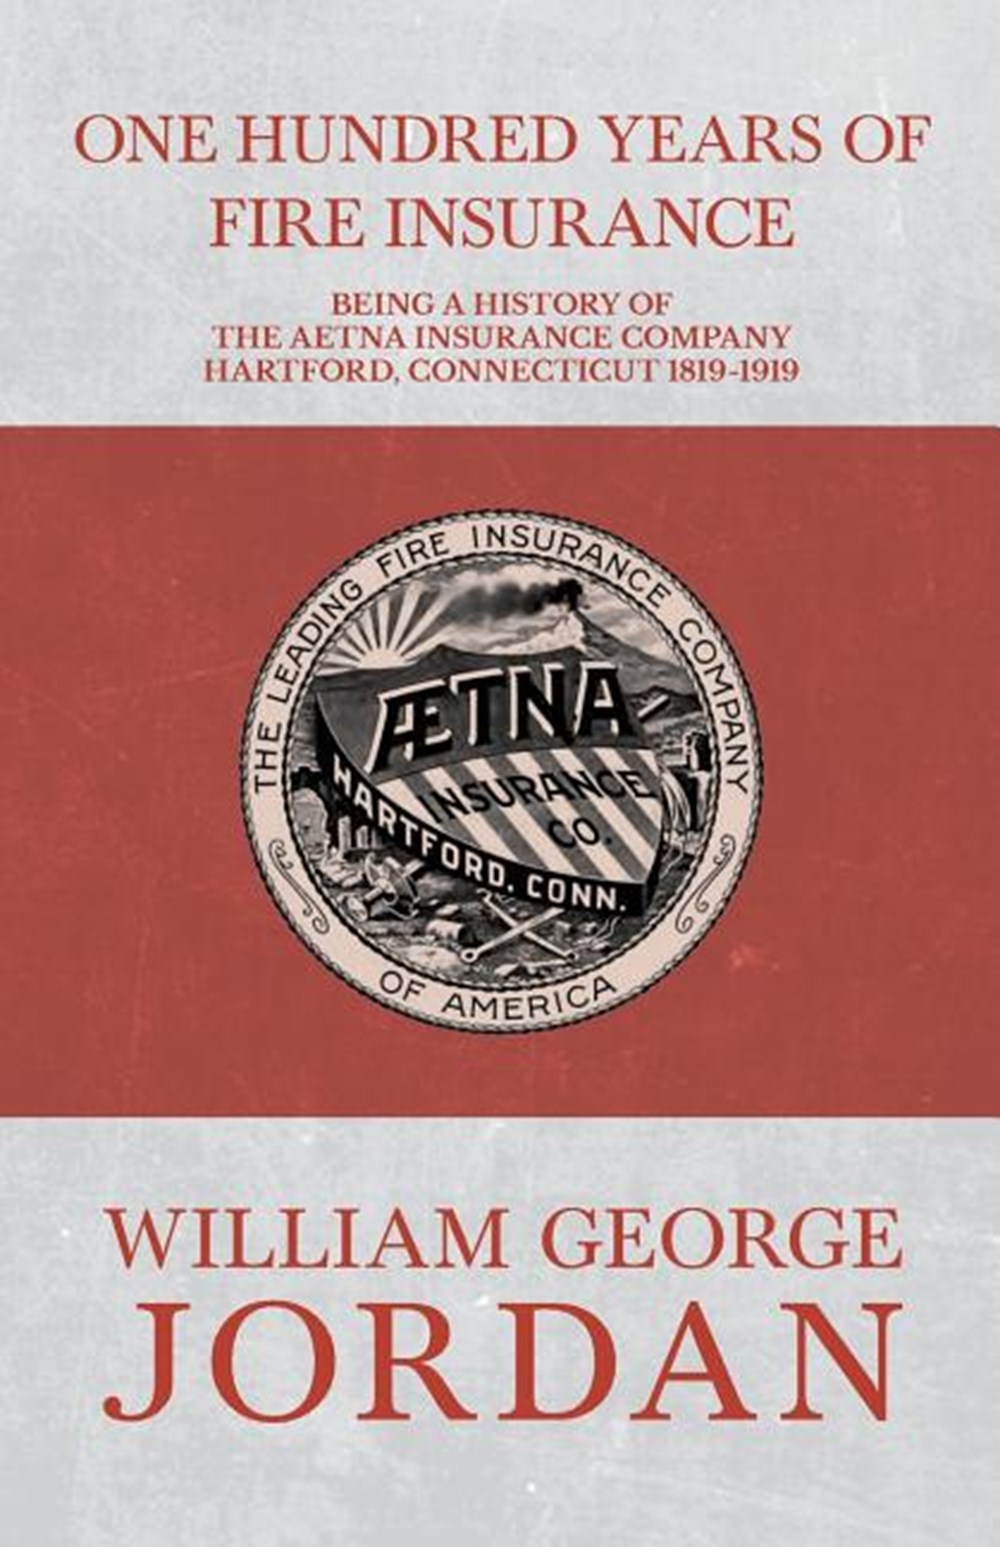 One Hundred Years of Fire Insurance - Being a History of the Aetna Insurance Company Hartford, Conne